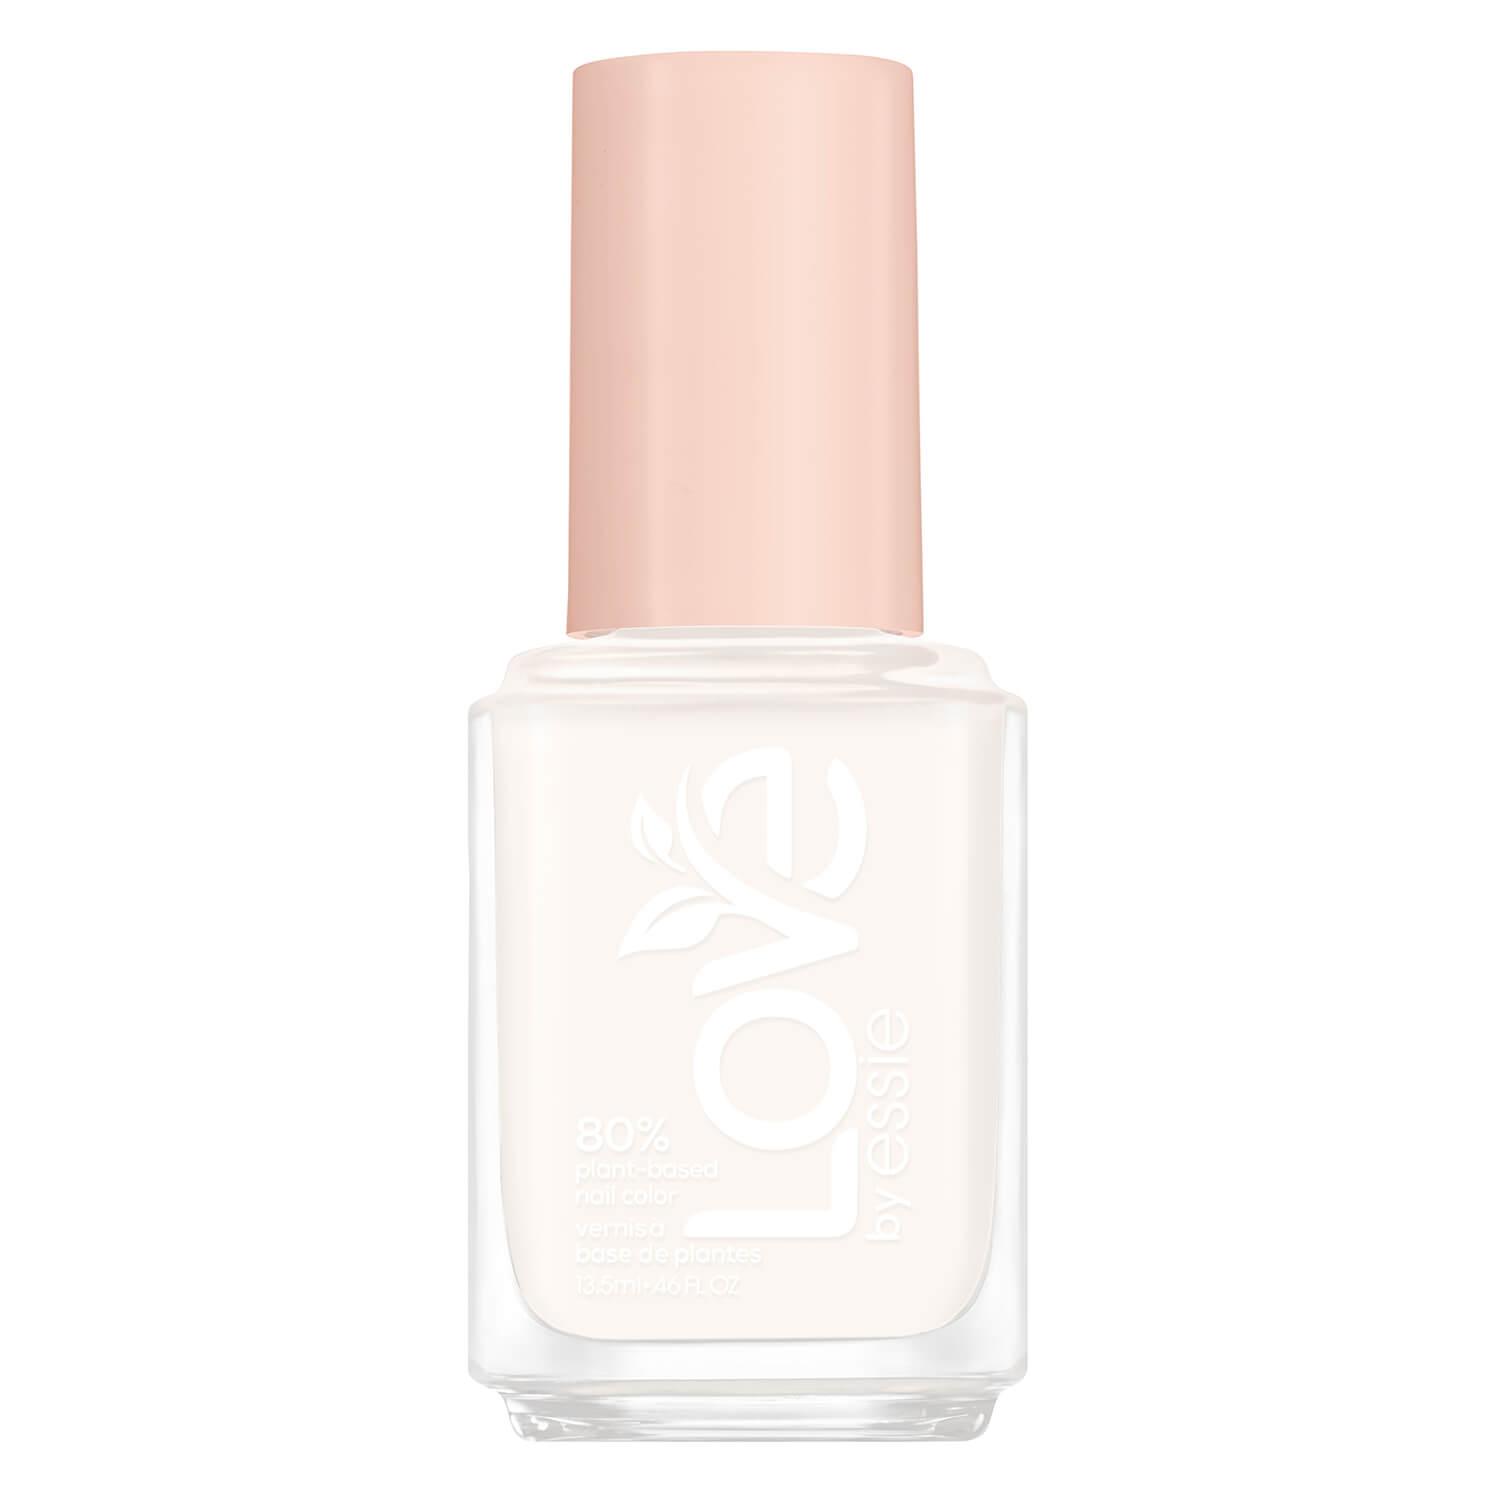 Love by essie - blessed-never-stressed 0